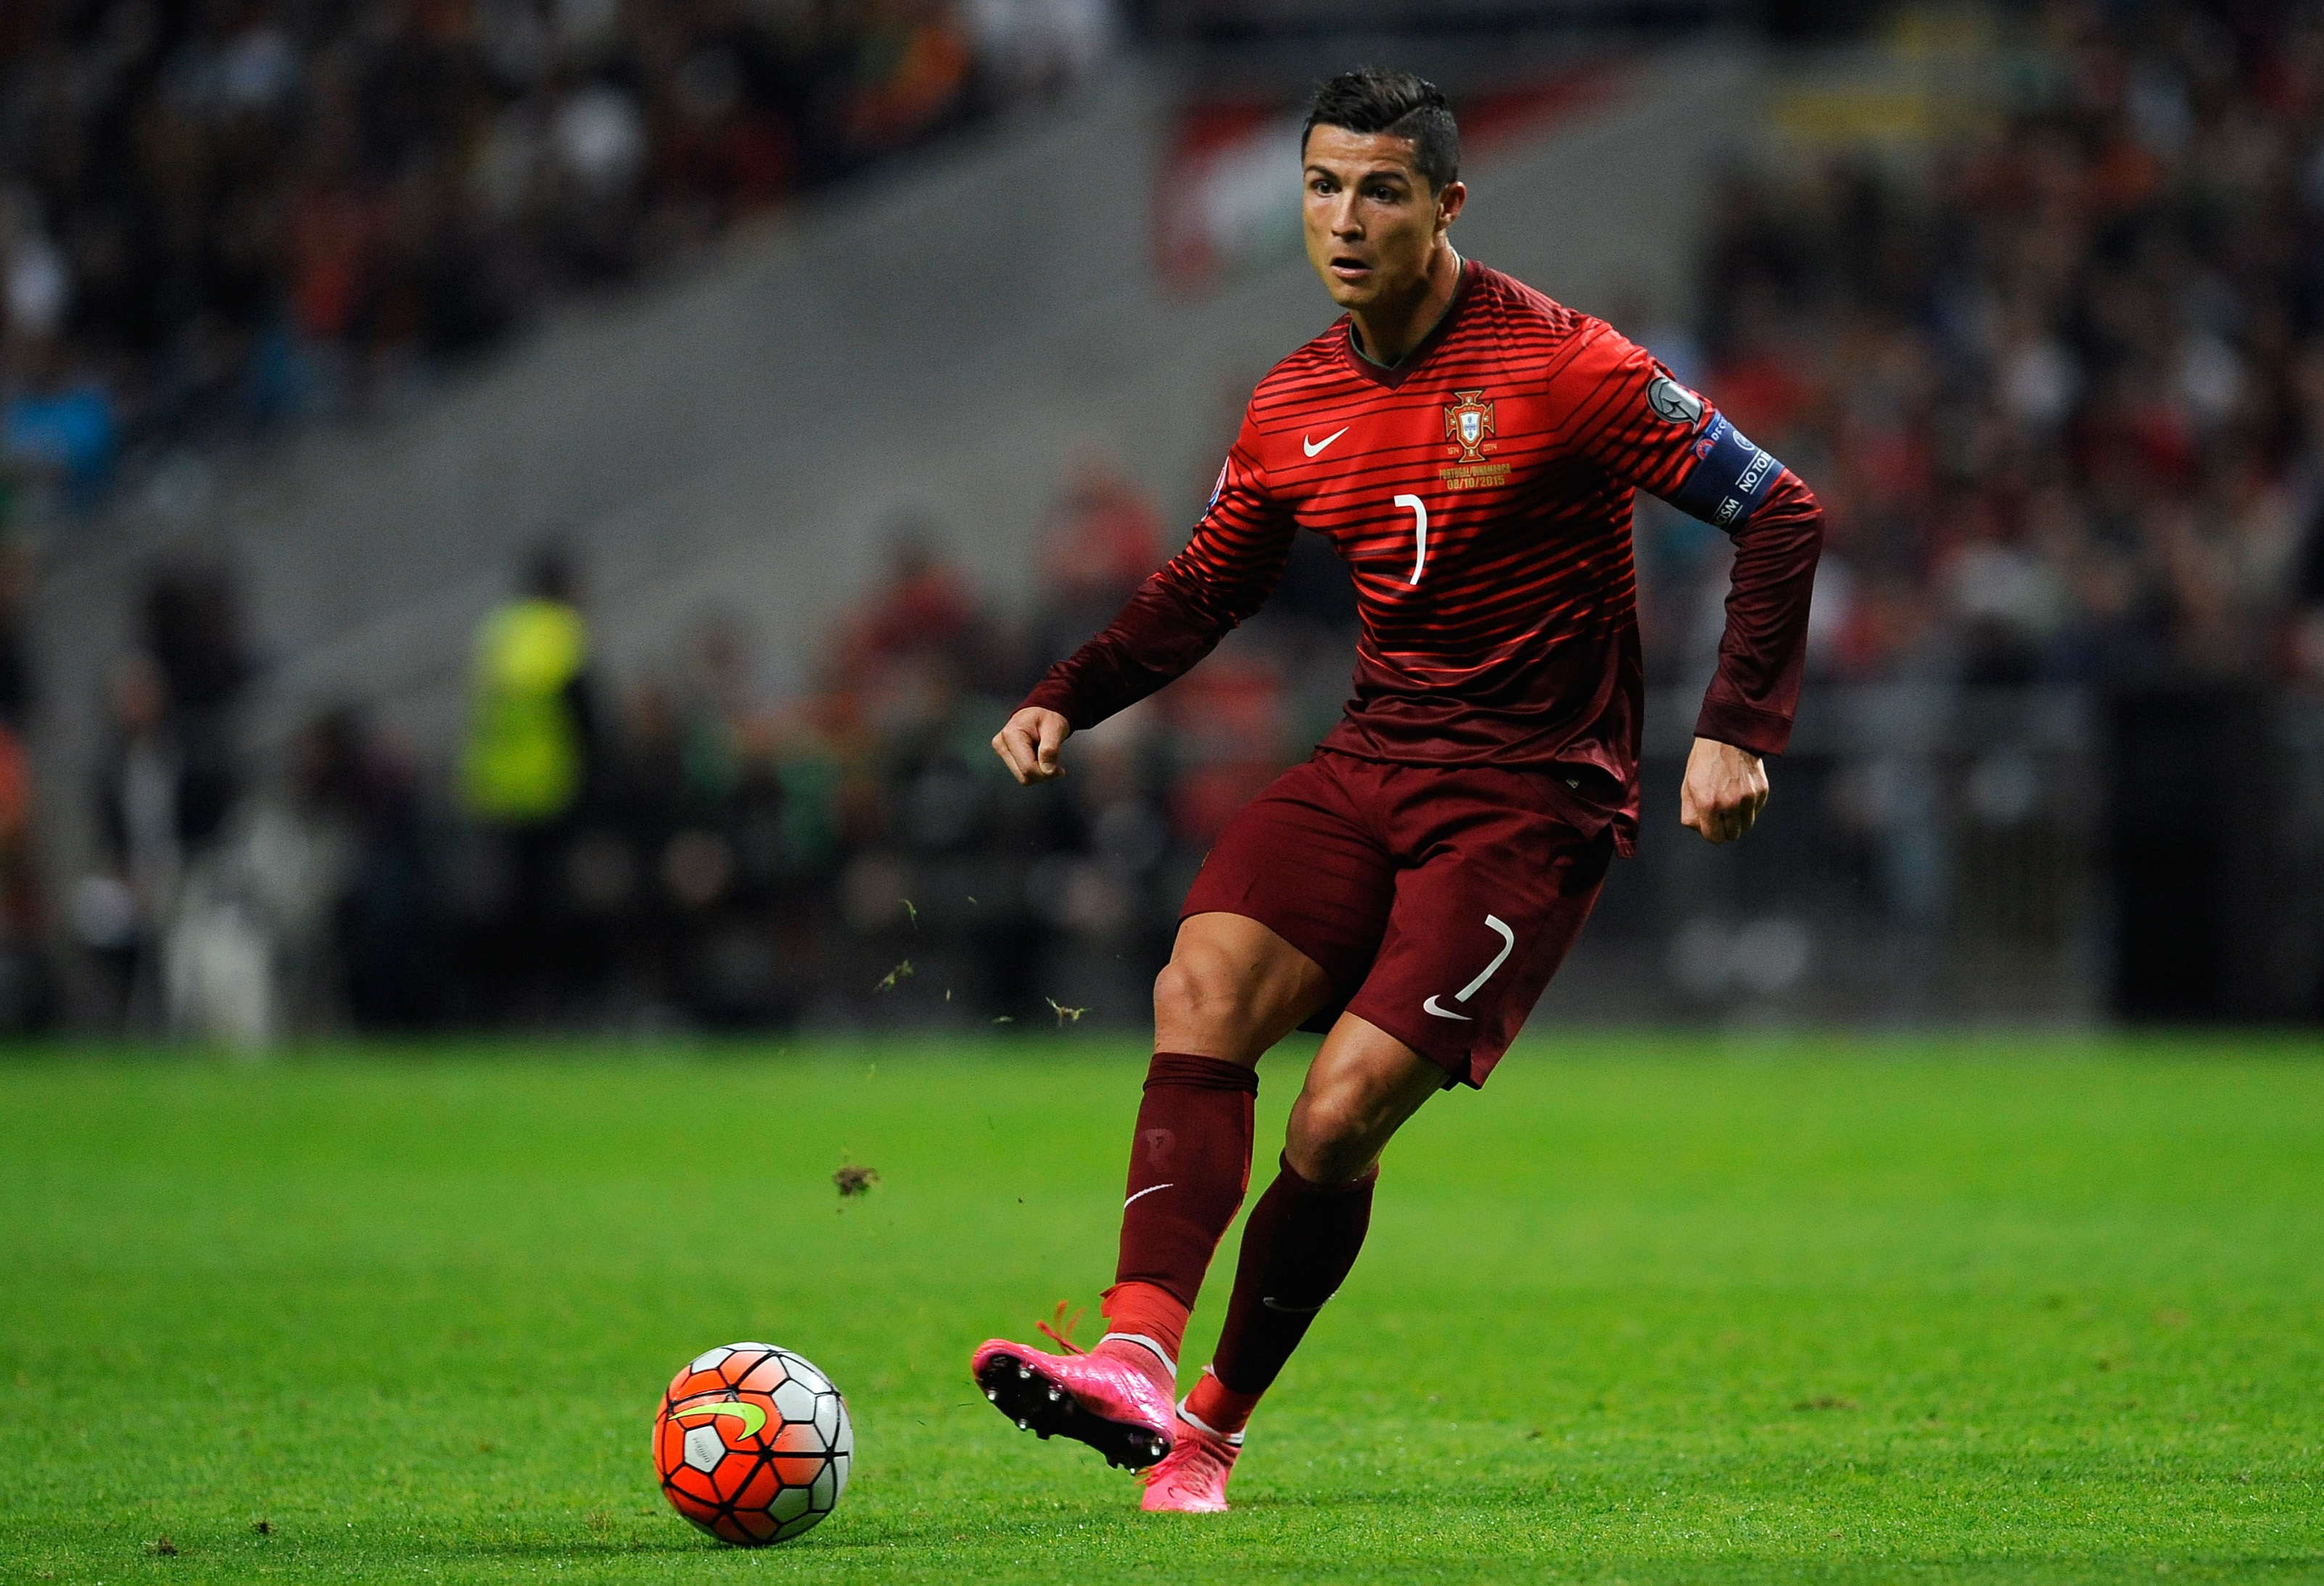 Cr7 Wallpaper Hd - CR7 Wallpapers : Feel free to send us your own